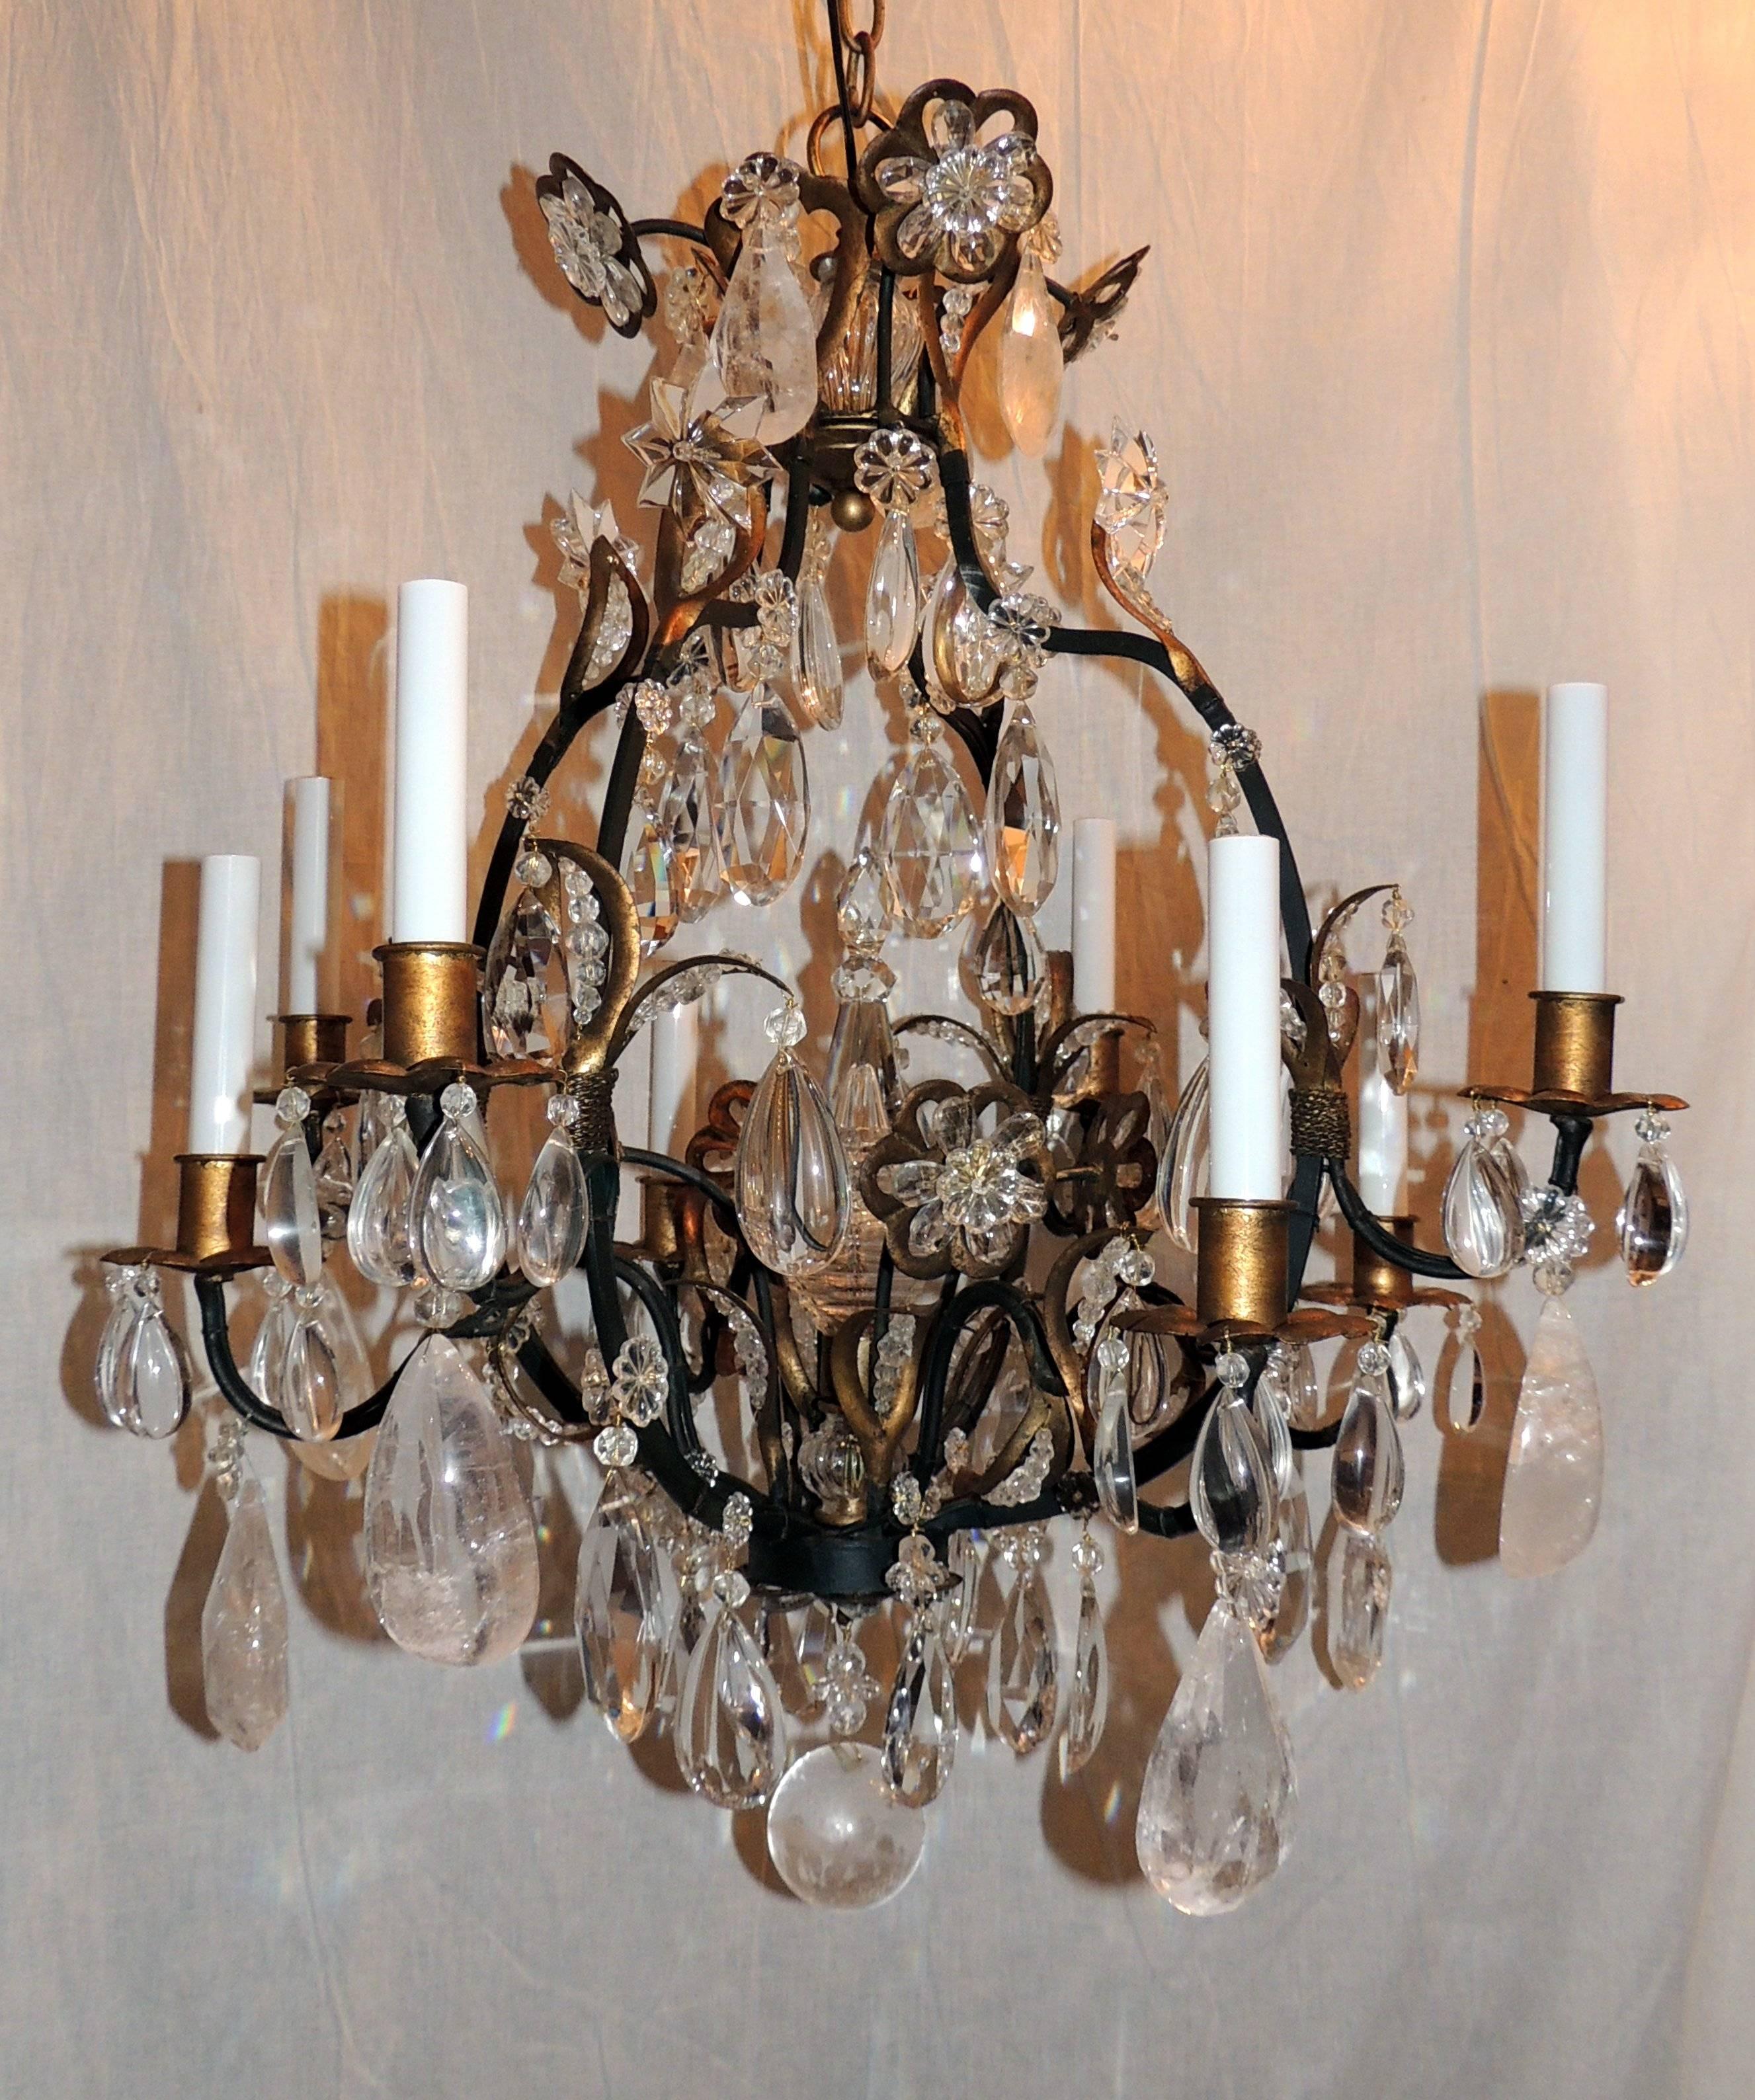 A lovely set of three French iron & rock crystal chandeliers with eight lights in the manner / style of Maison Baguès.
The details: beaded crystals are the center of each of the leaves, rock crystal surrounds the top crystal flowers and throughout